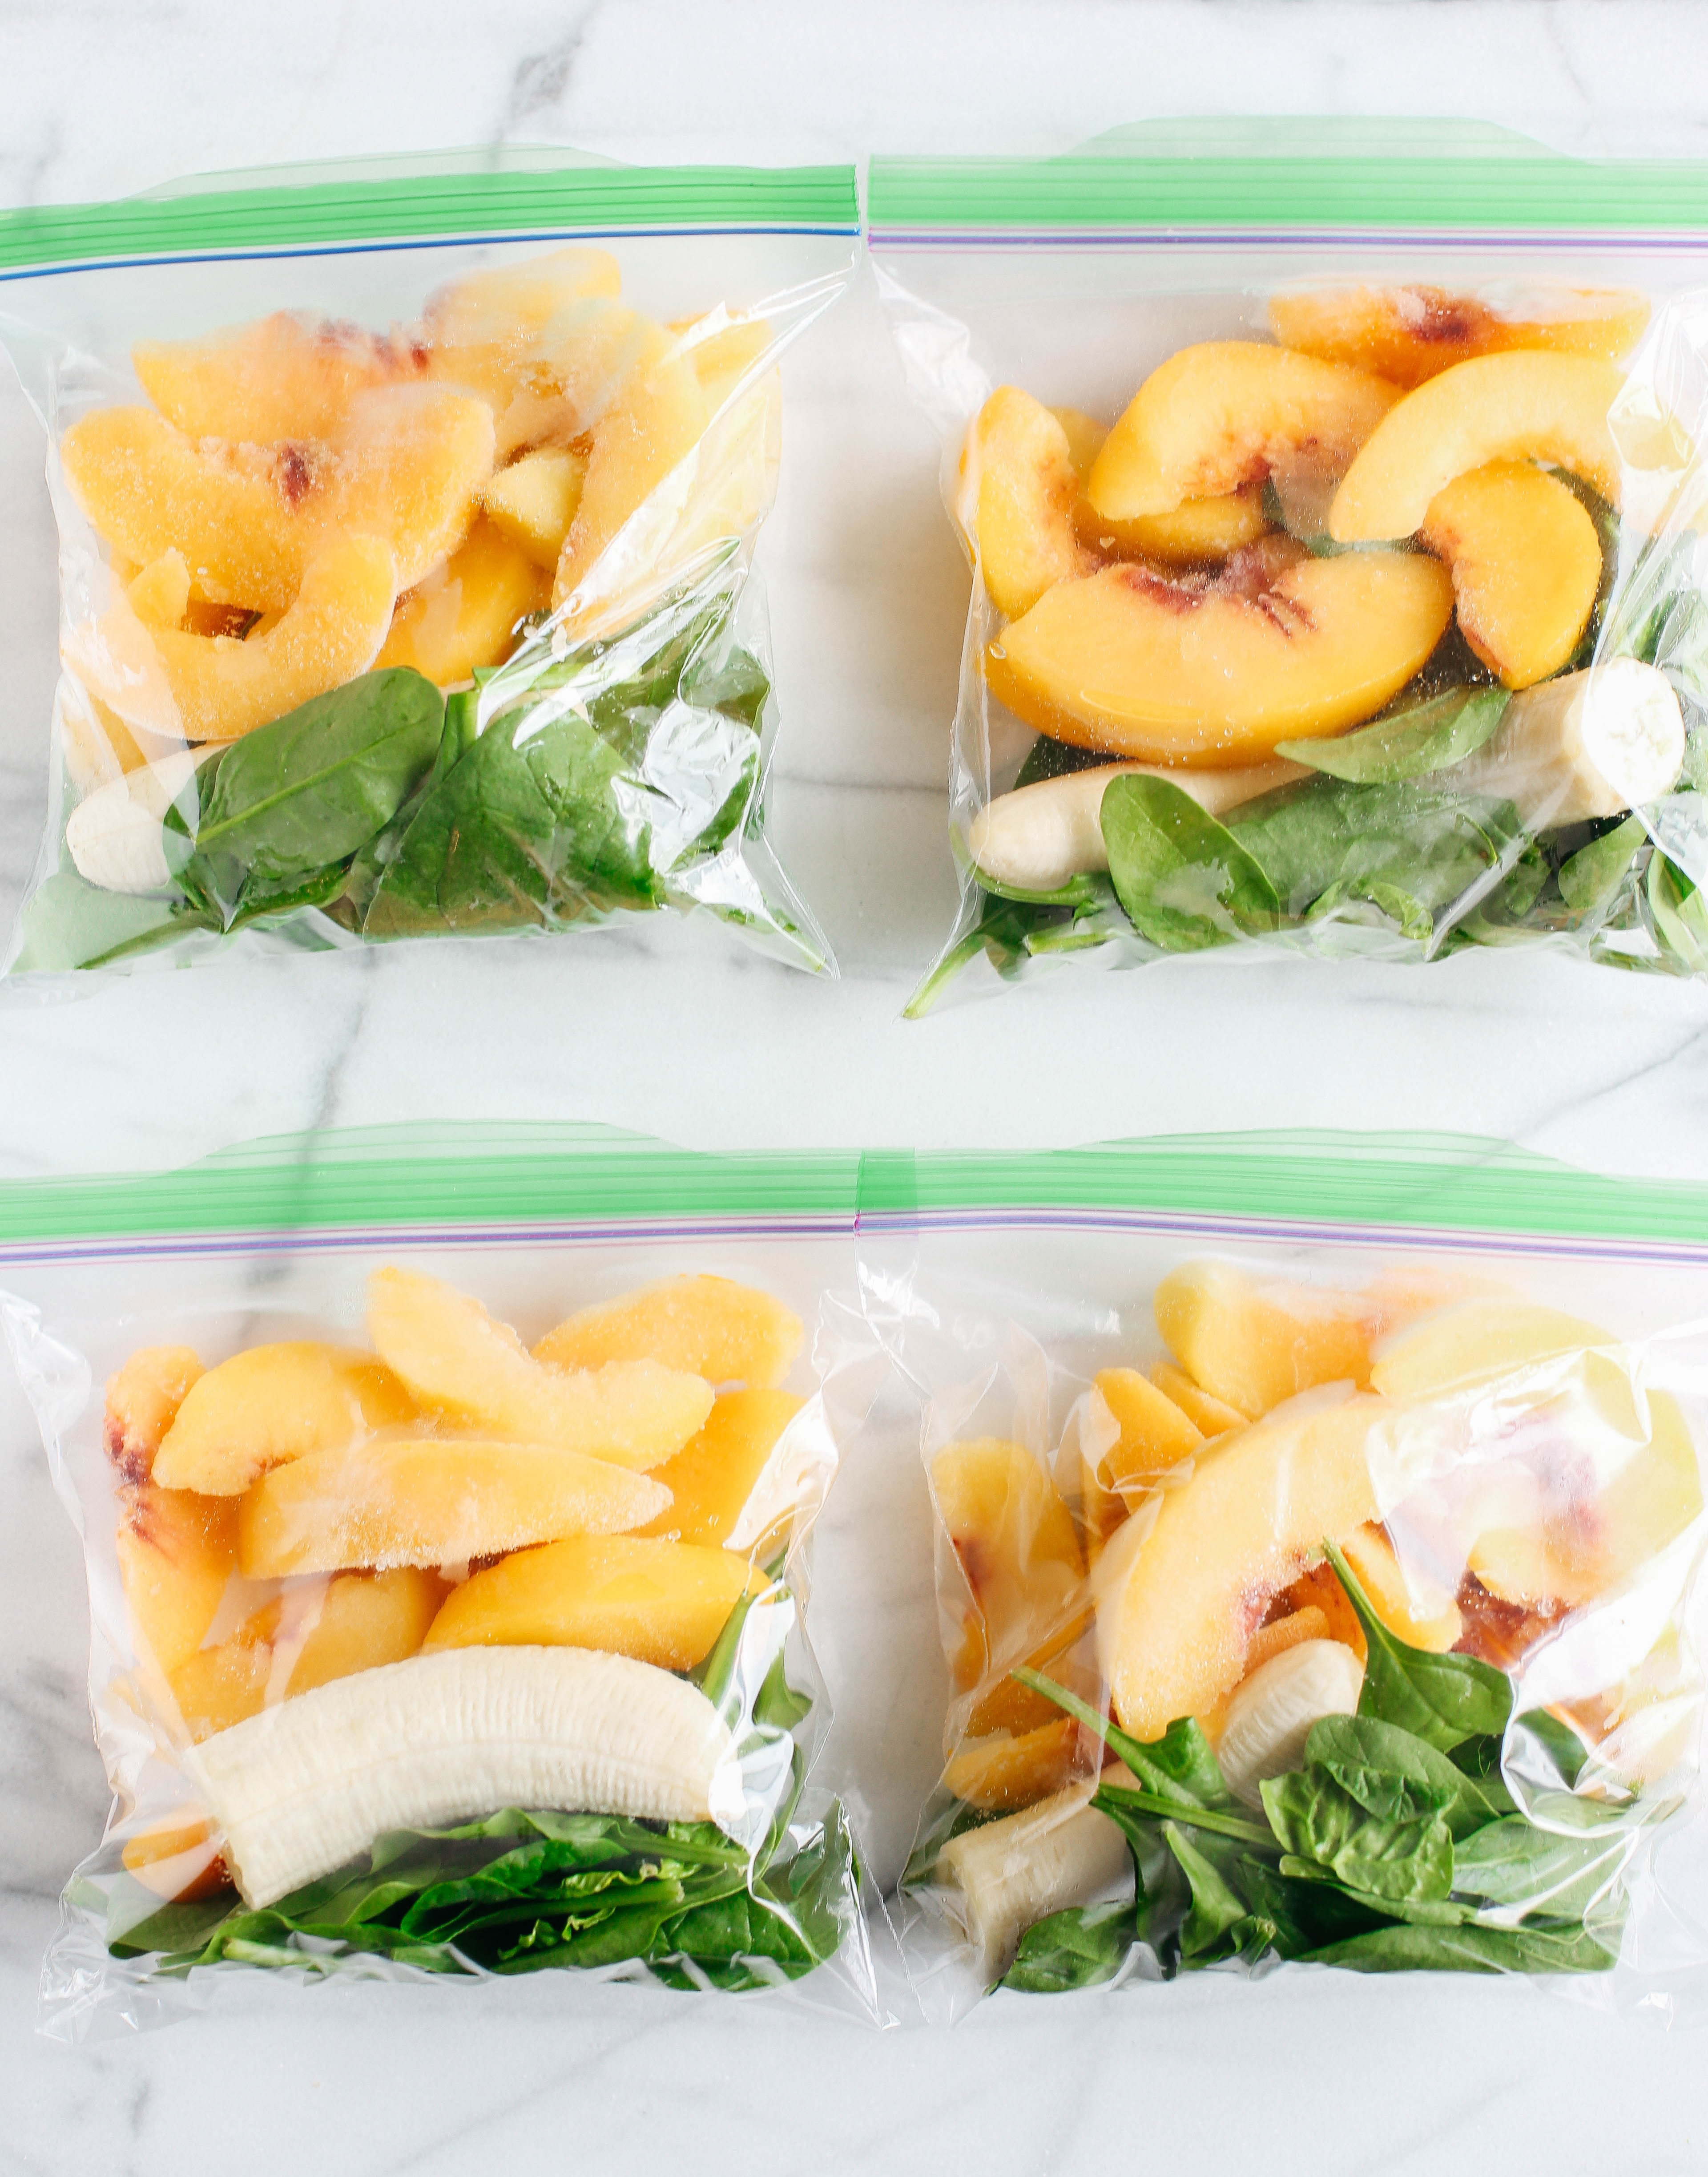 This delicious Ginger Peach Detox Smoothie is sweet, creamy and super refreshing! 